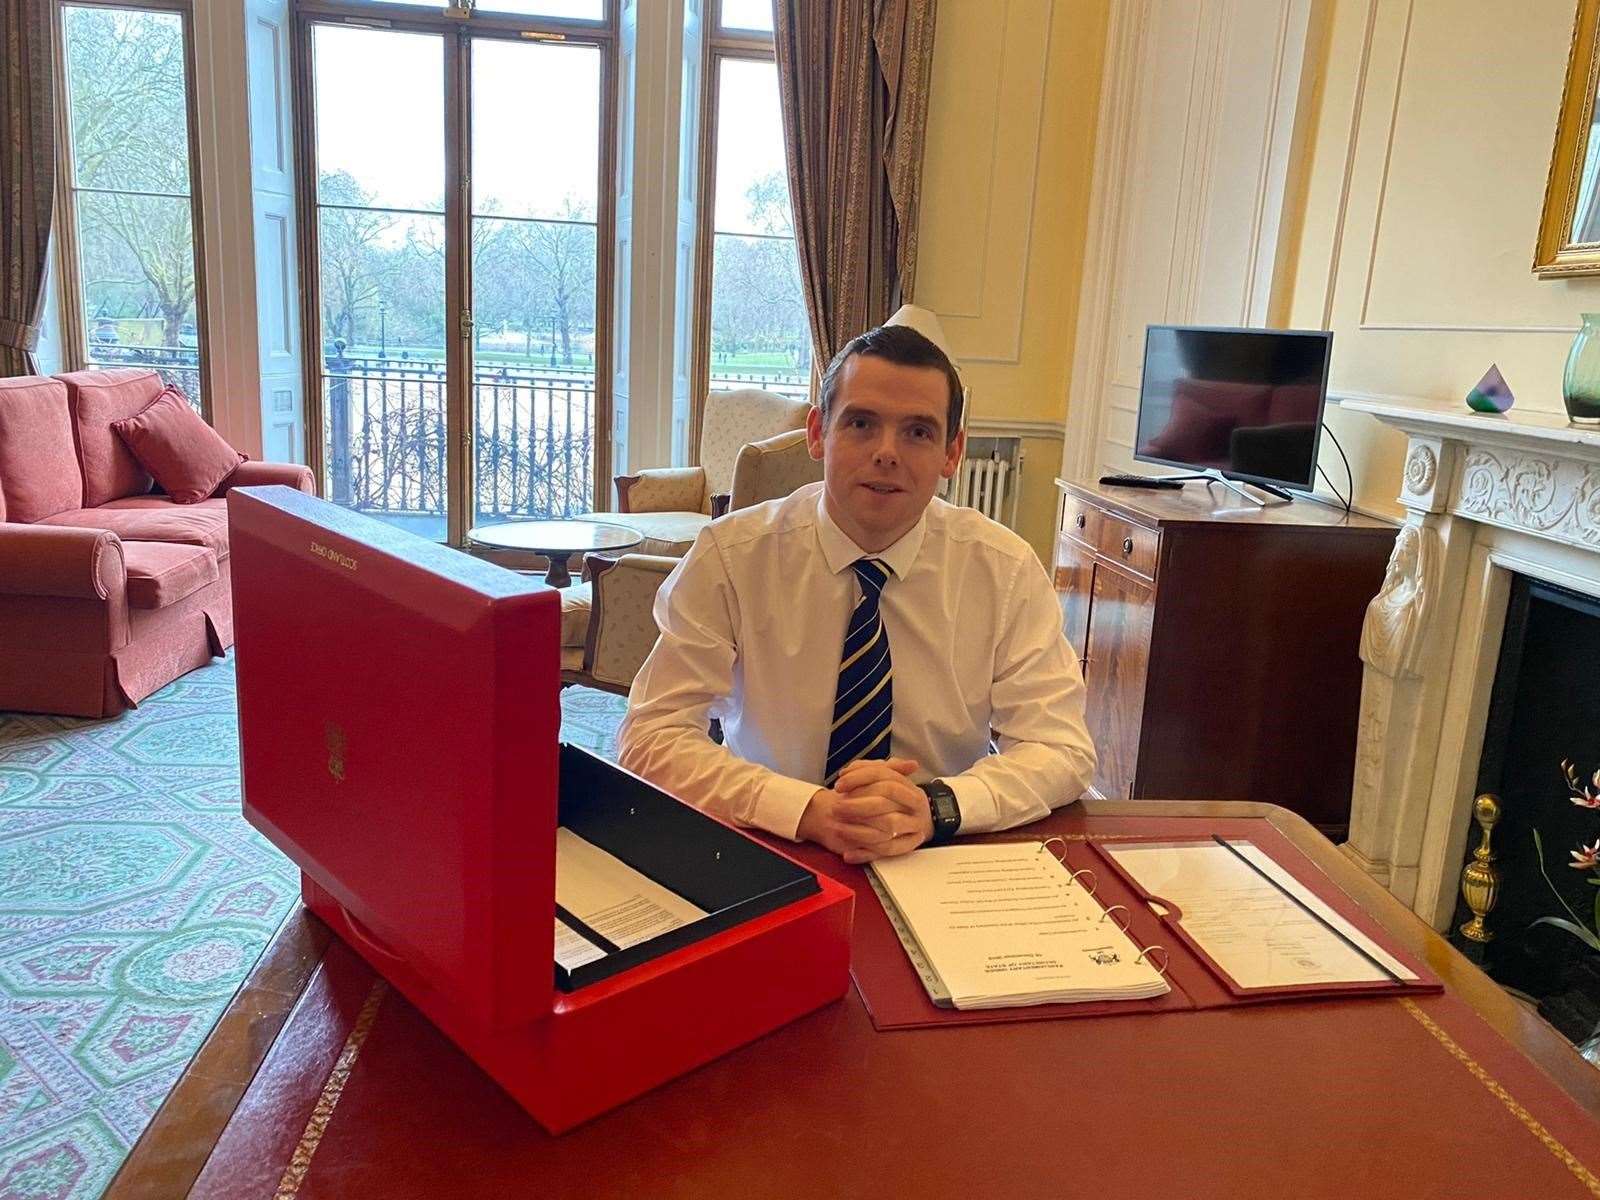 Douglas Ross gets straight into his new role at the Scotland Office.